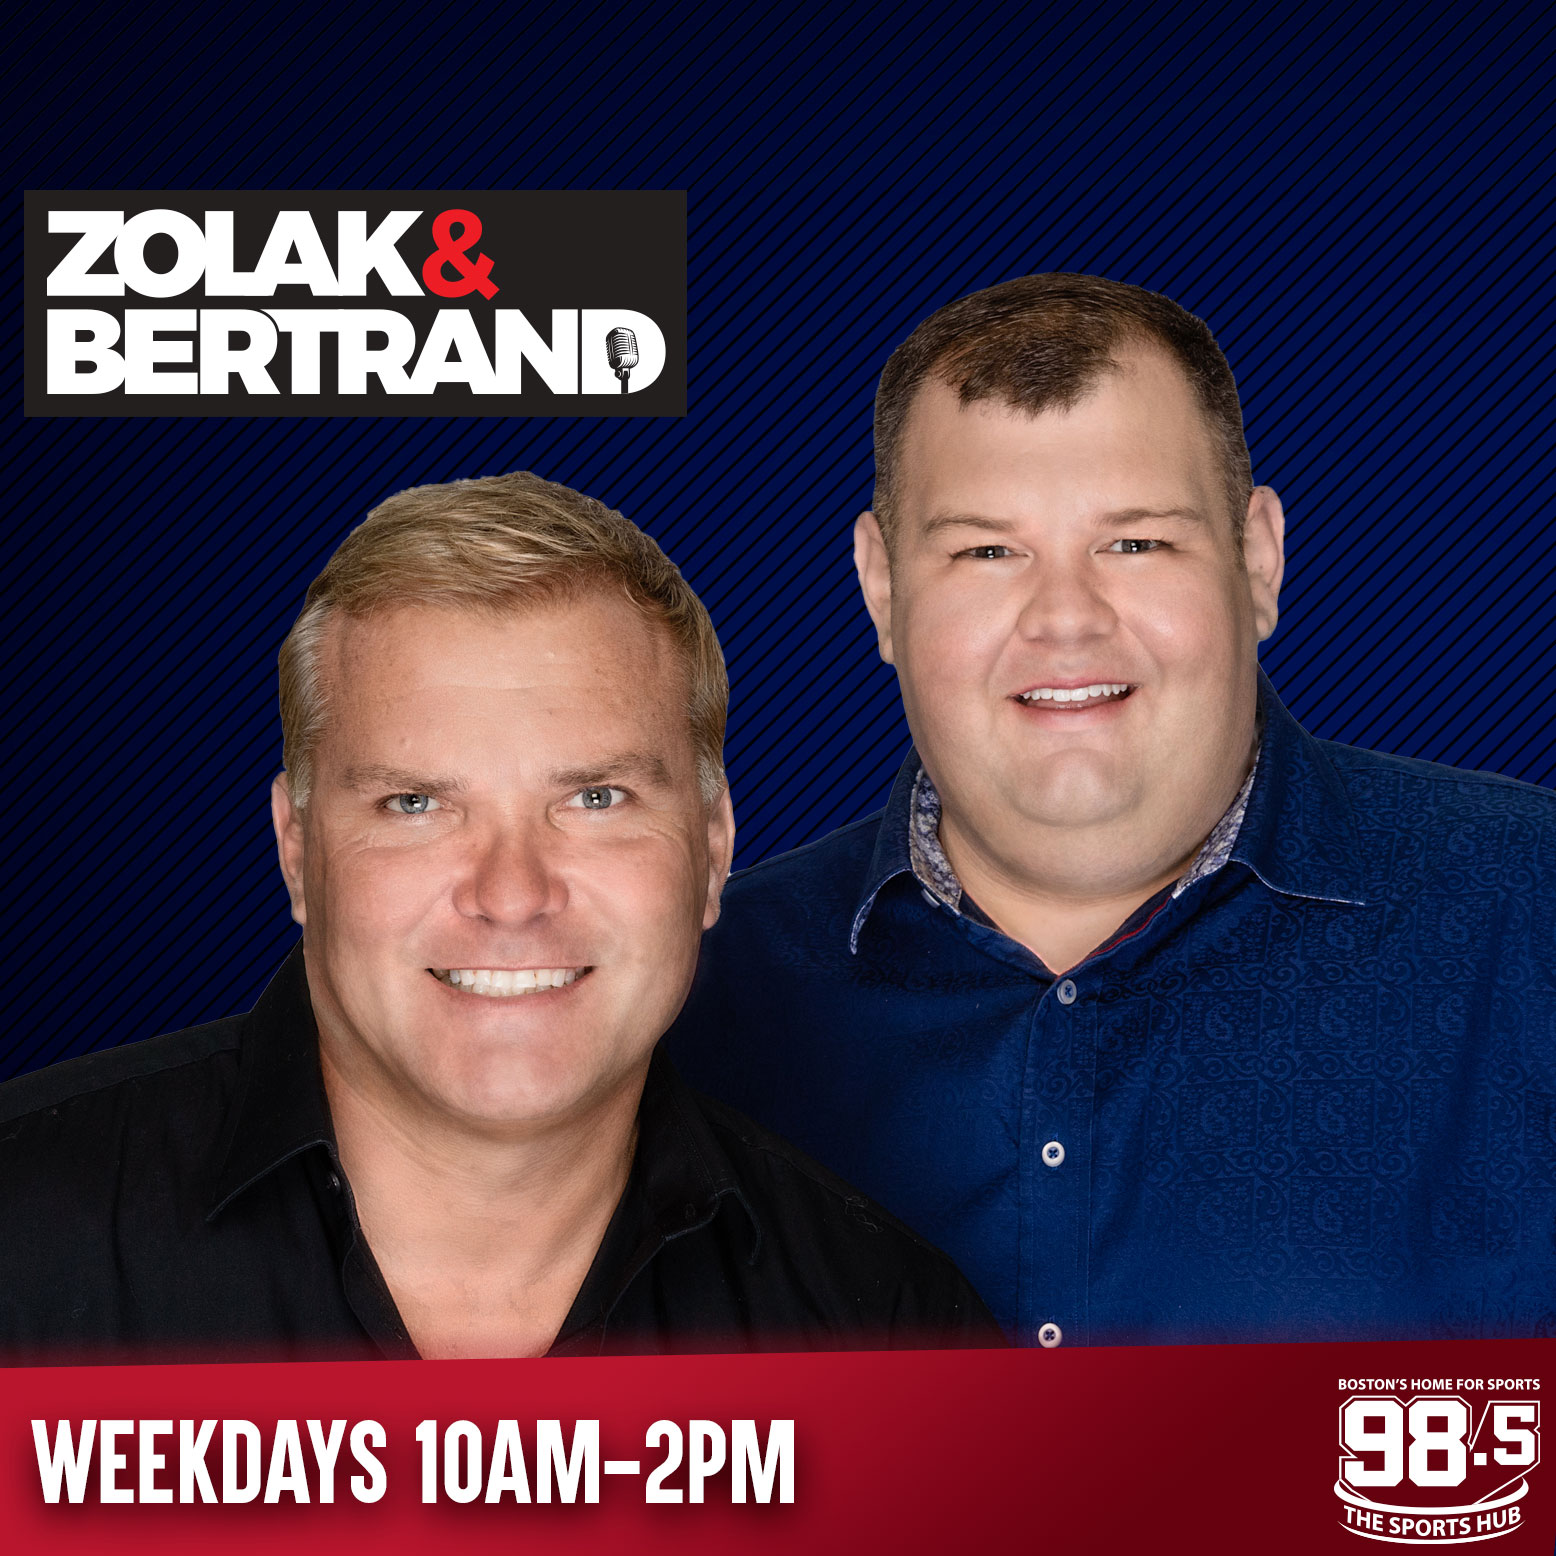 Scott Zolak on Tom Brady potentially unretiring: "All of that is in play"